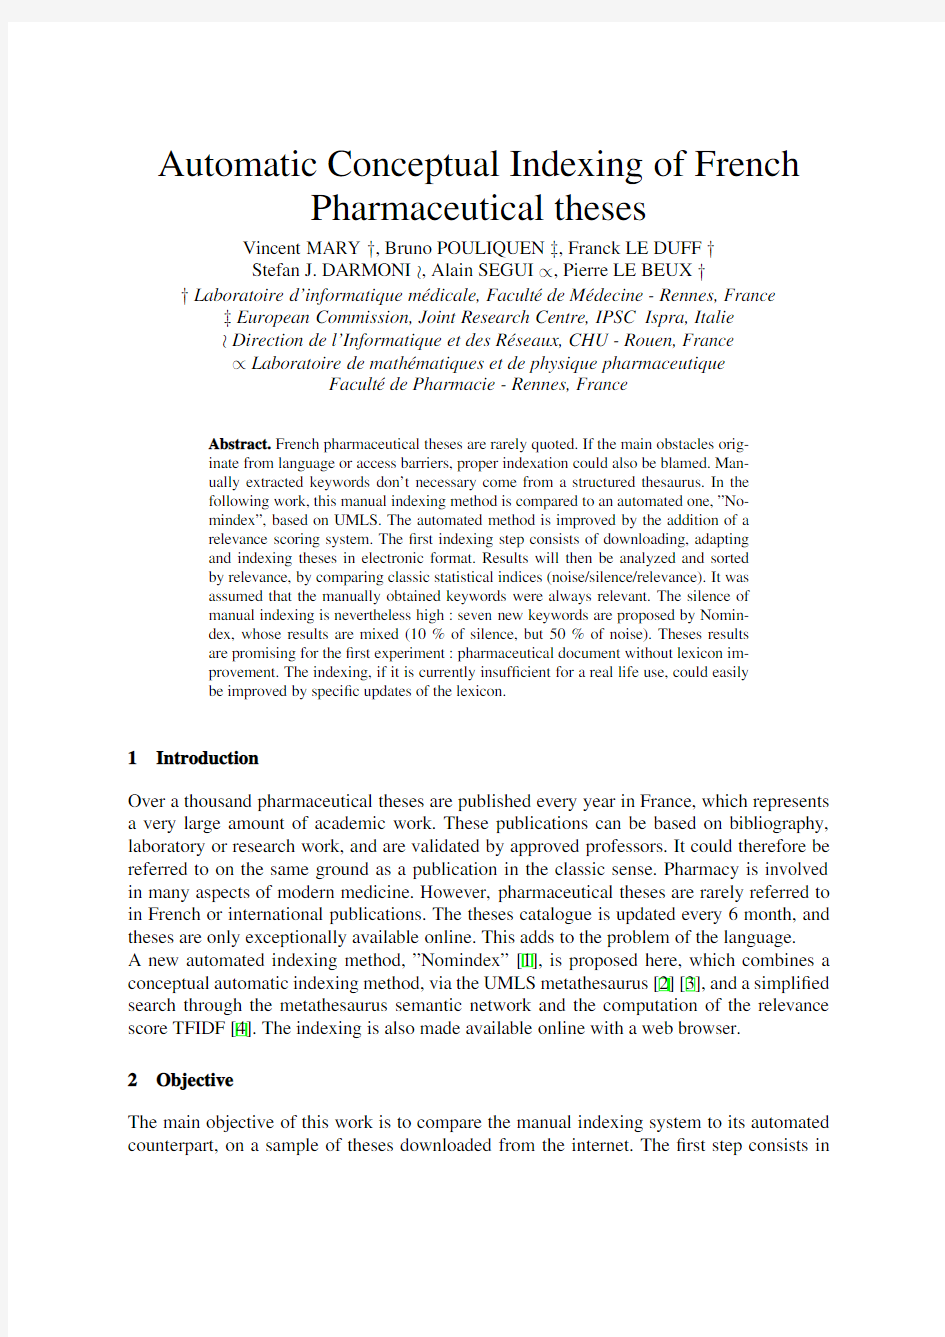 Automatic Conceptual Indexing of French Pharmaceutical